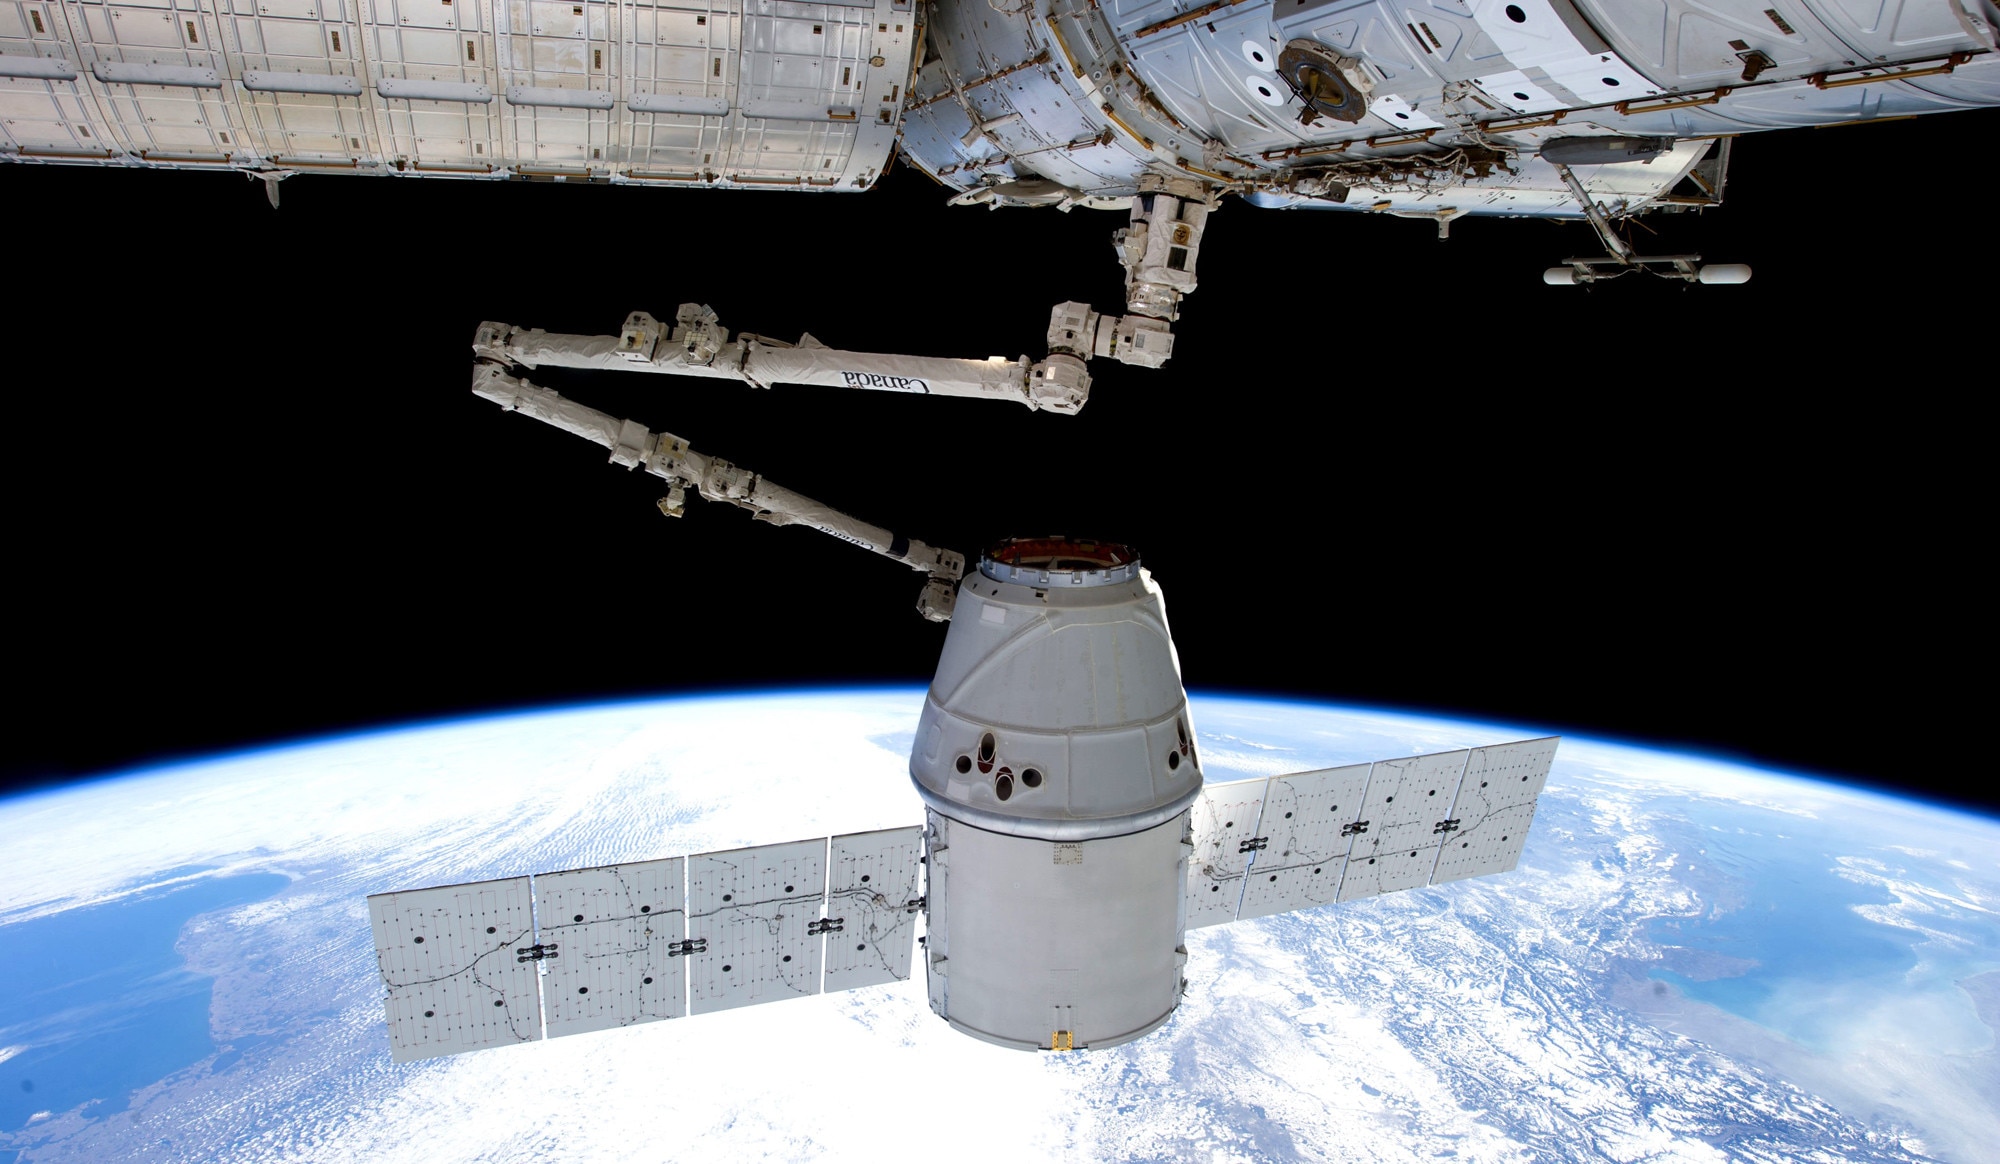 SpaceX Dragon and the International Space Station: The miracle of berth. Credit: NASA